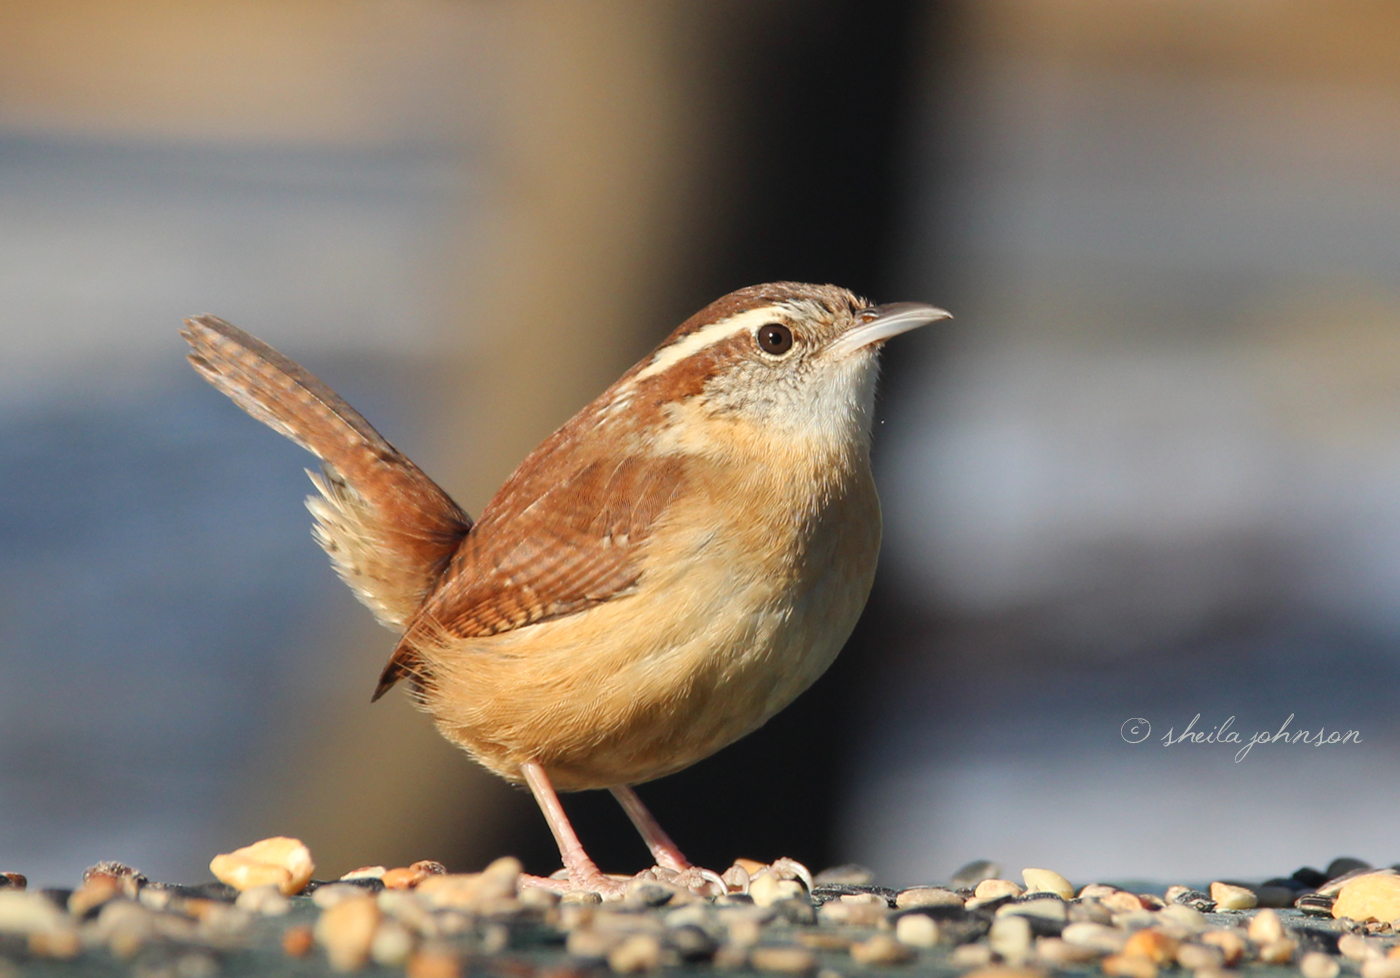 Some Will Tell You The Carolina Wren Is A Shy Little Bird. That Has Not Been Our Experience. They Are Common And Friendly At Mariner Point Park In Joppa, Maryland.